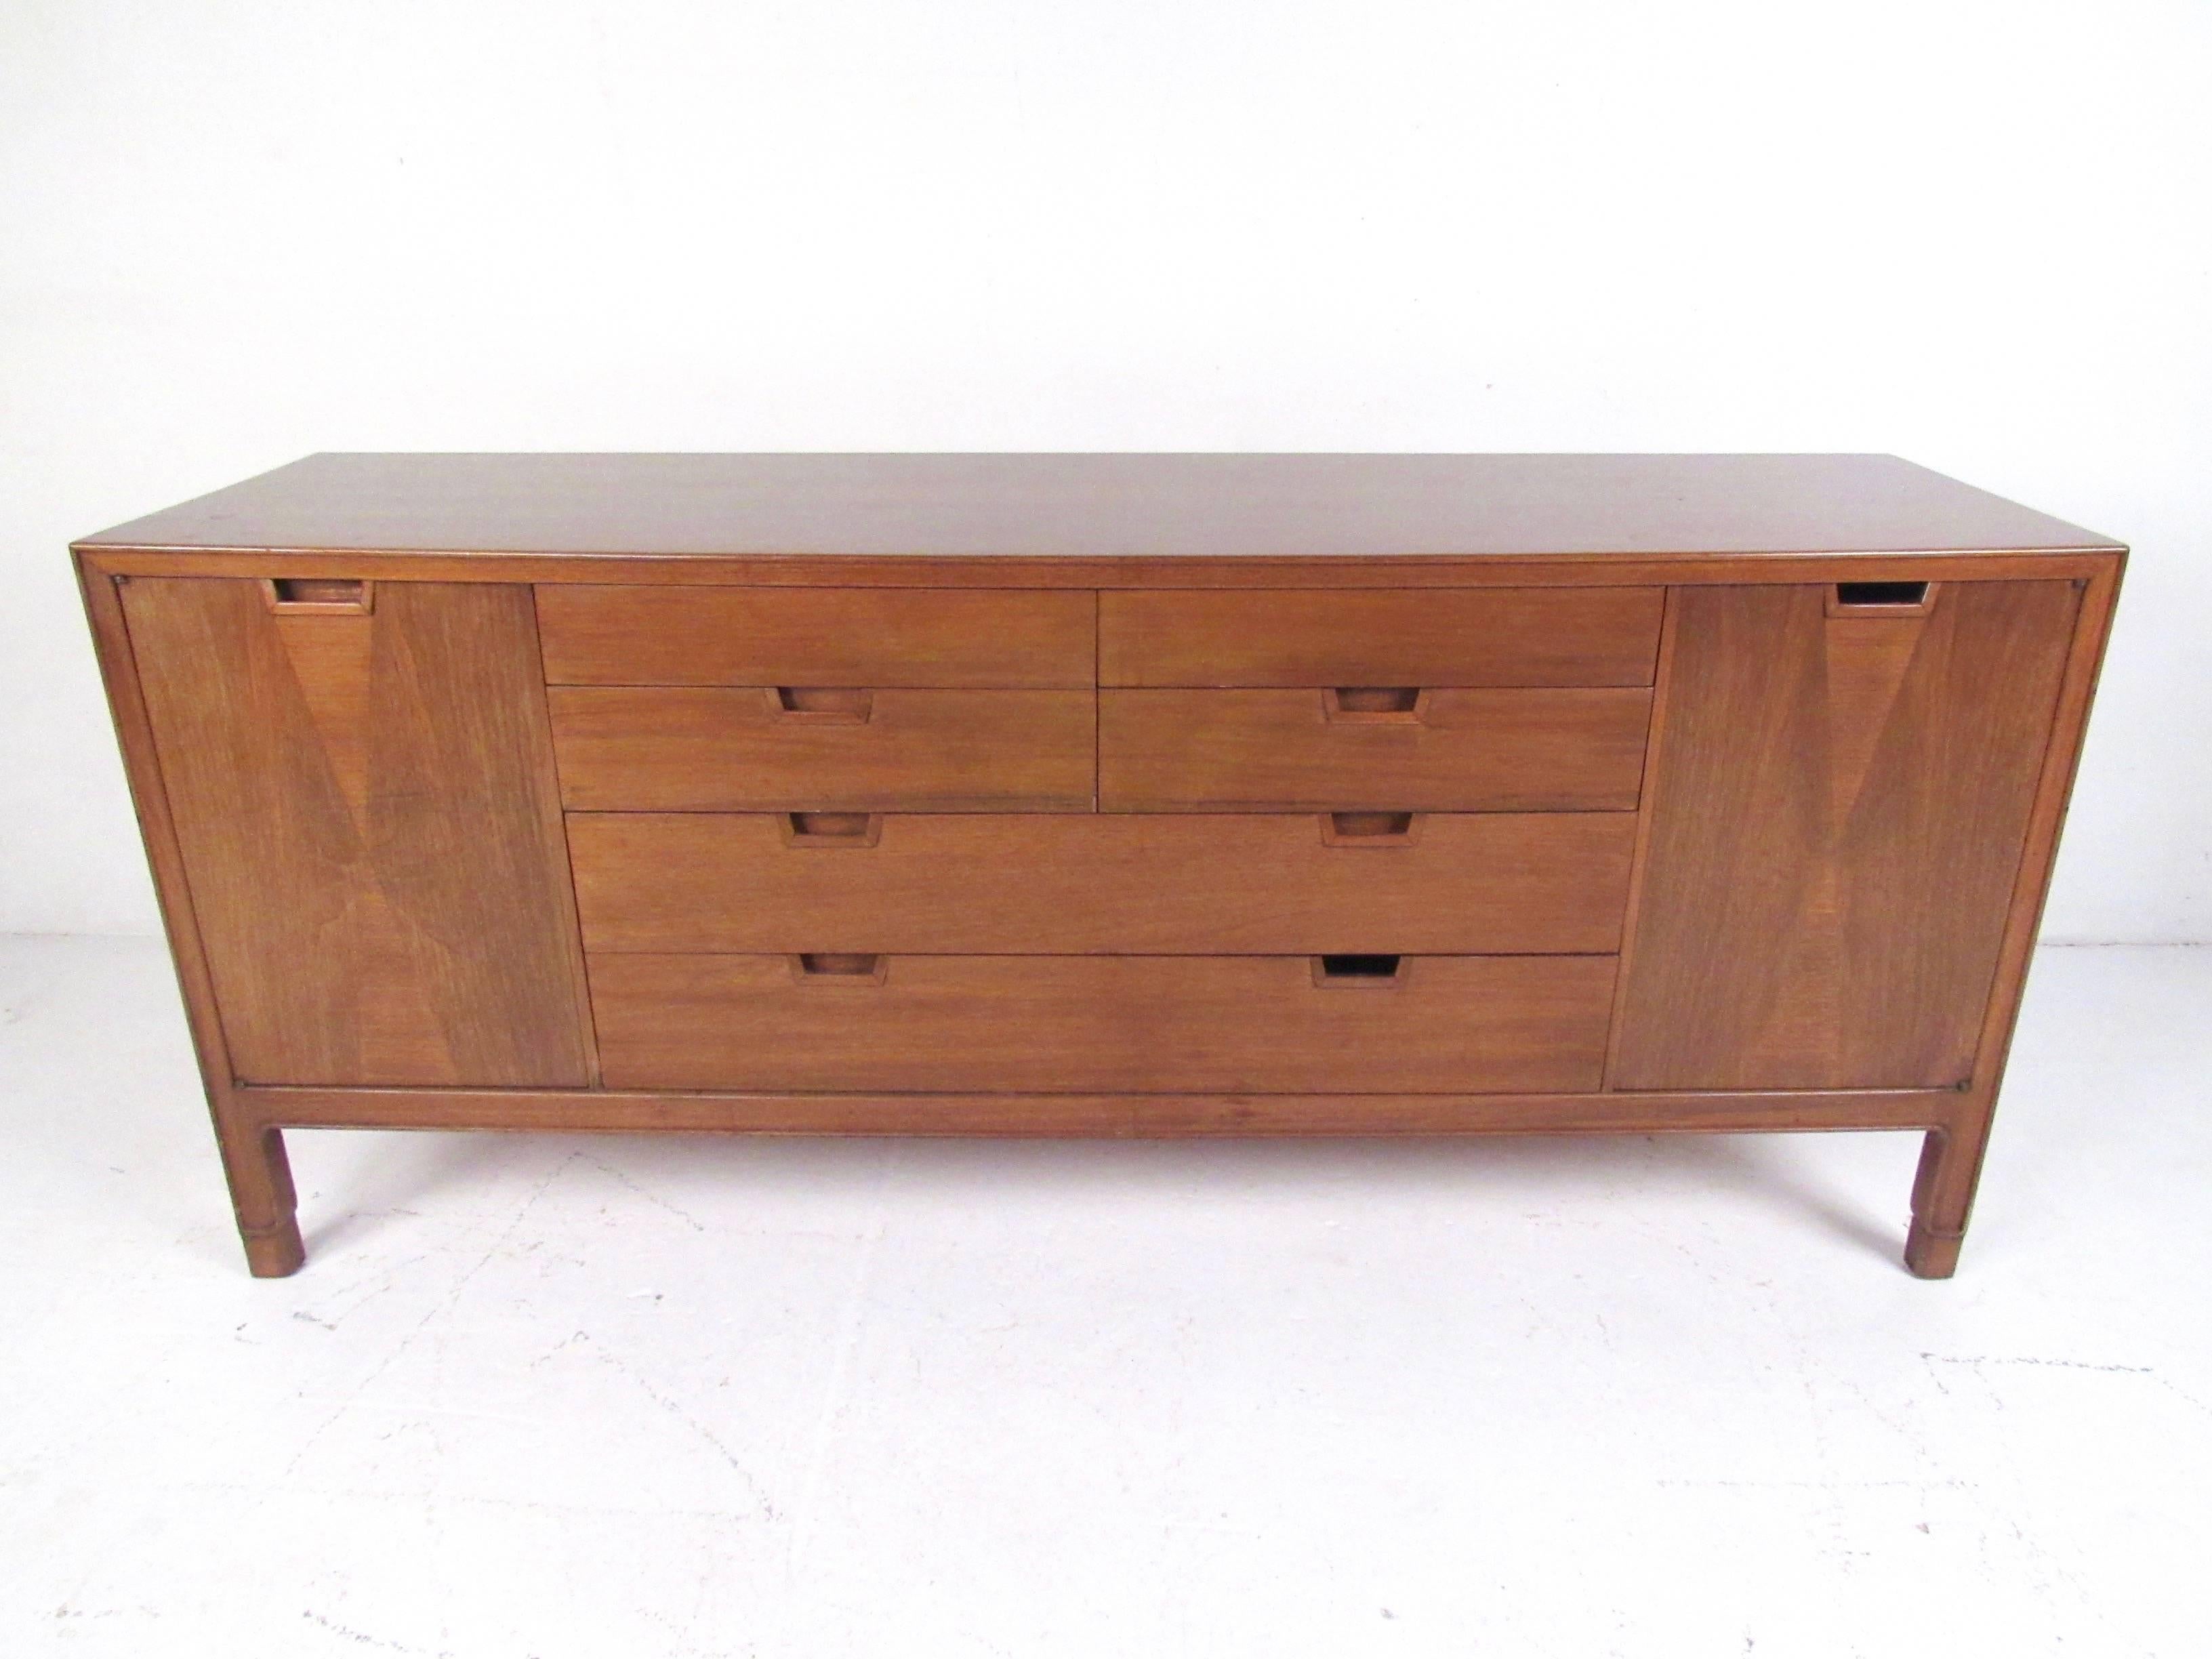 This John Stuart bedroom dresser features vintage walnut finish and timeless Mid-Century Modern style. From the 